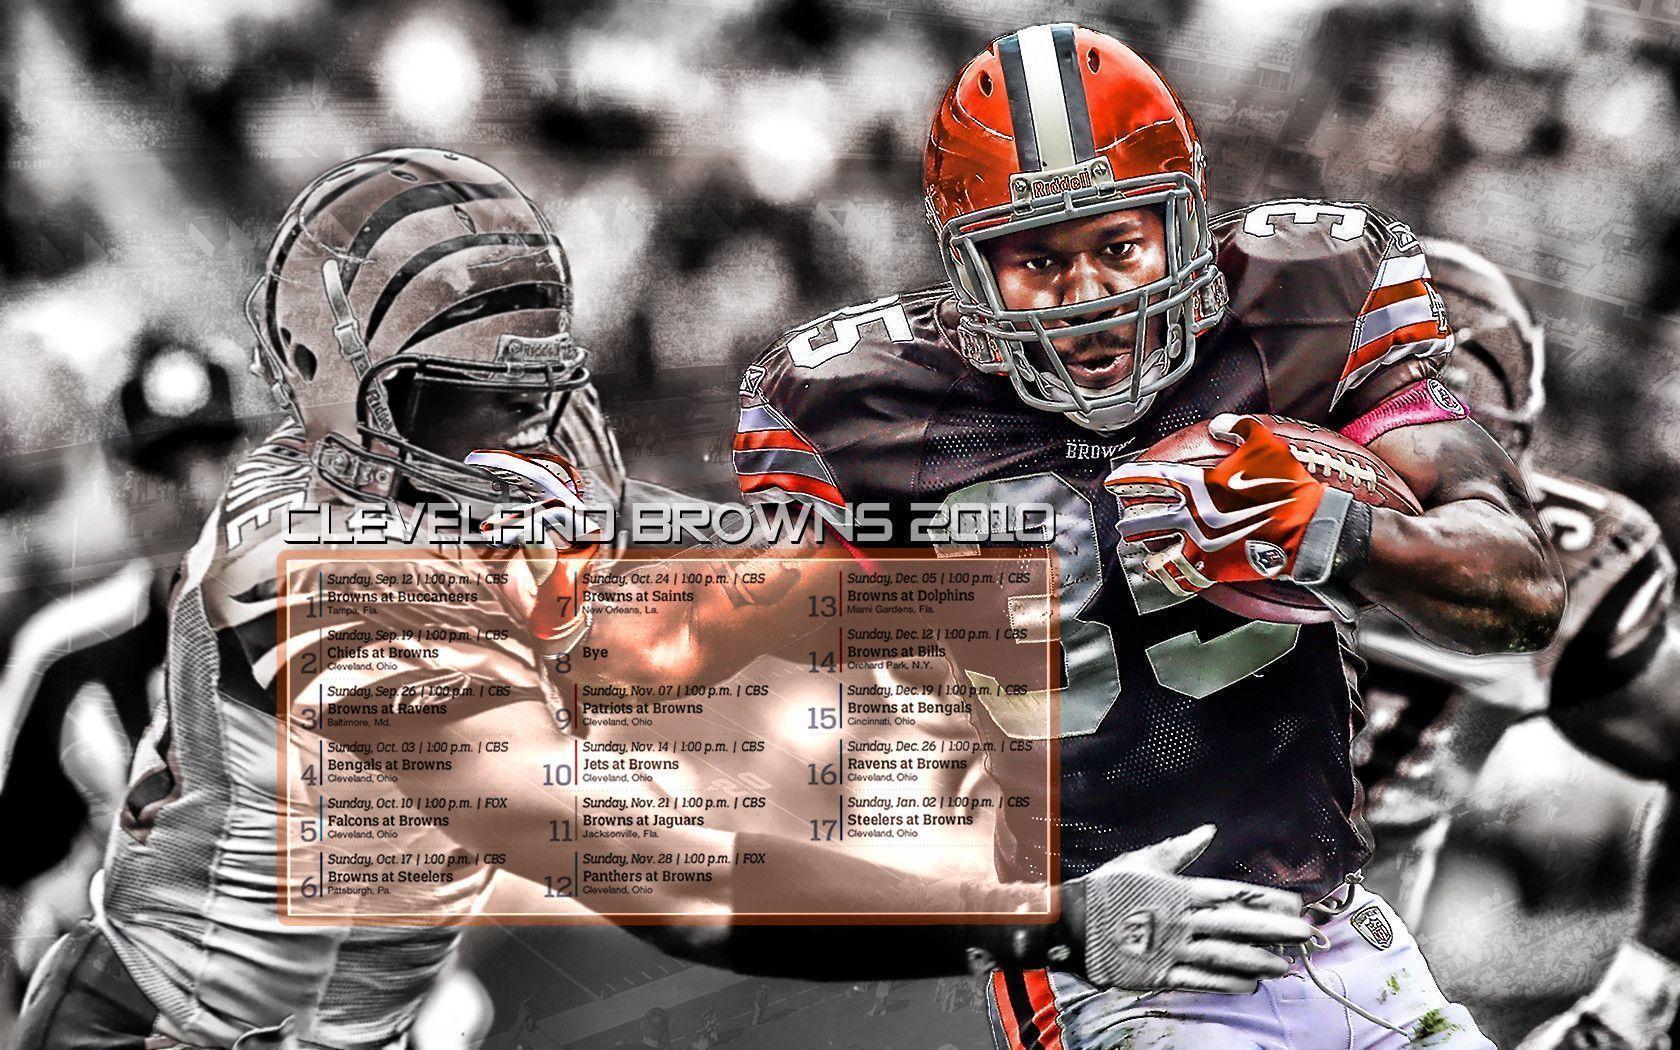 Browns wallpapers w/ schedule